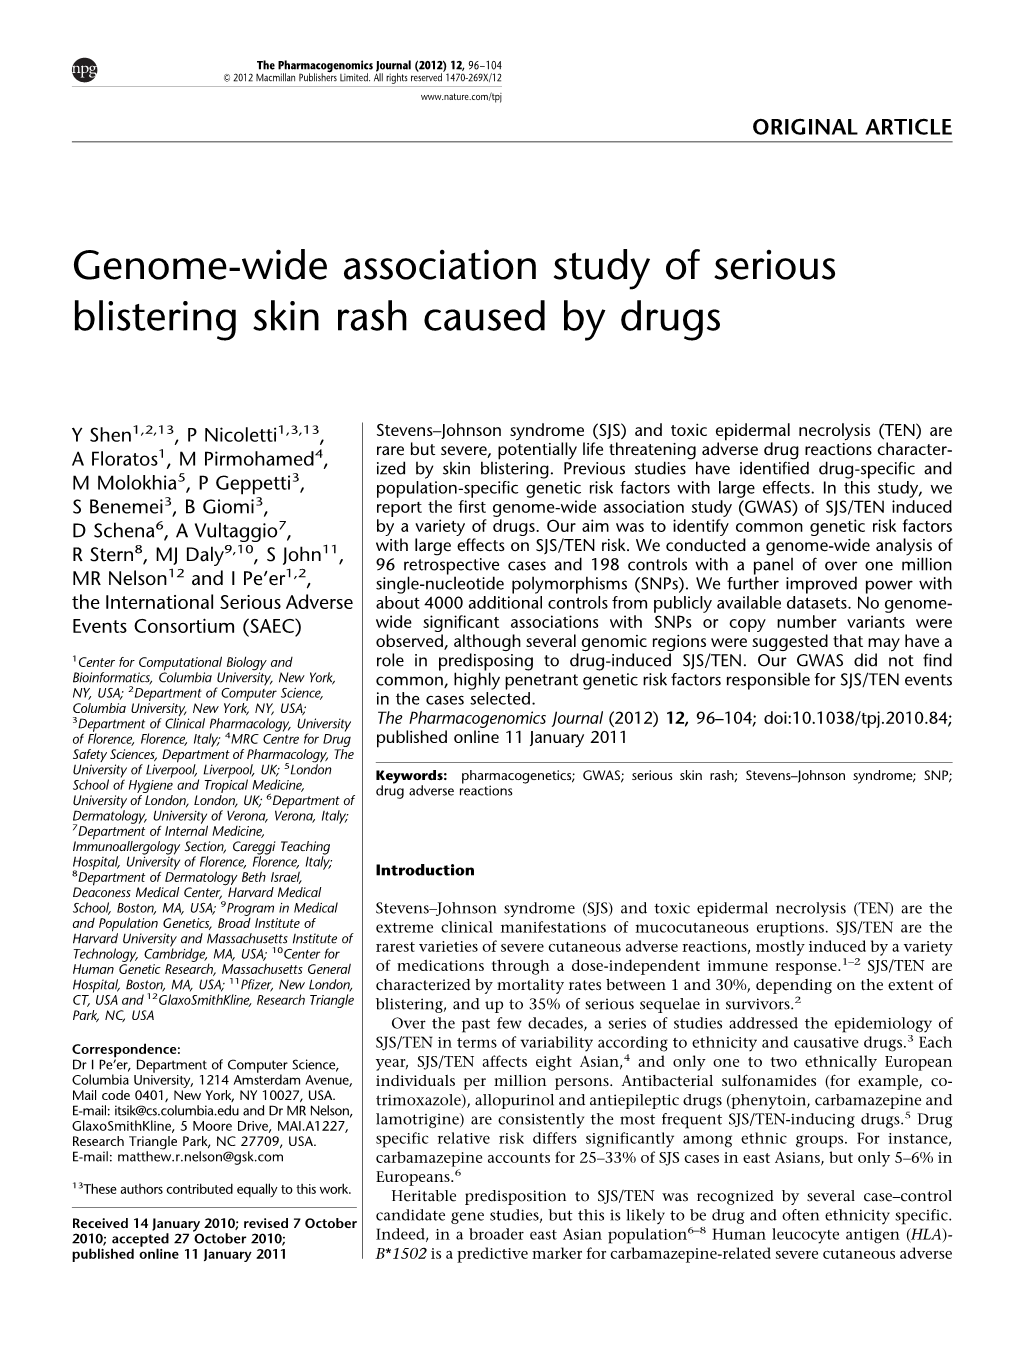 Genome-Wide Association Study of Serious Blistering Skin Rash Caused by Drugs